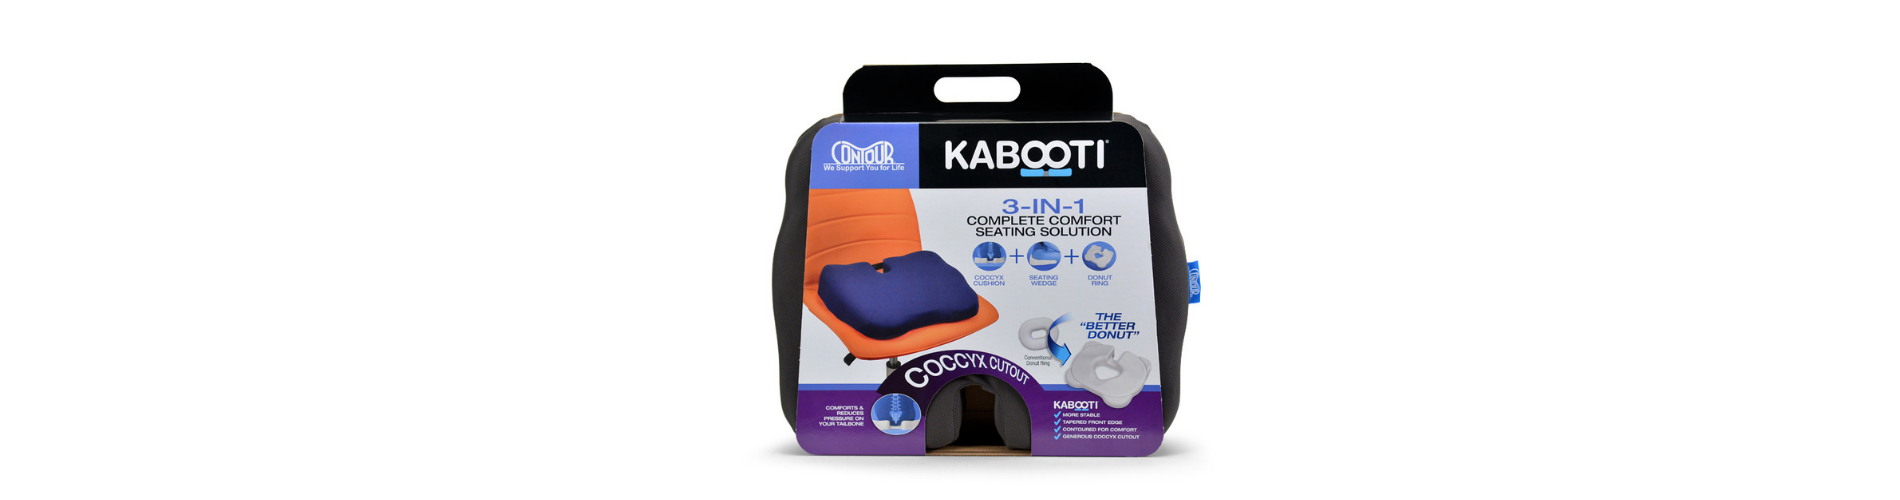 Kabooti seat cushion provides relief and comfort – Palliance AB/AS